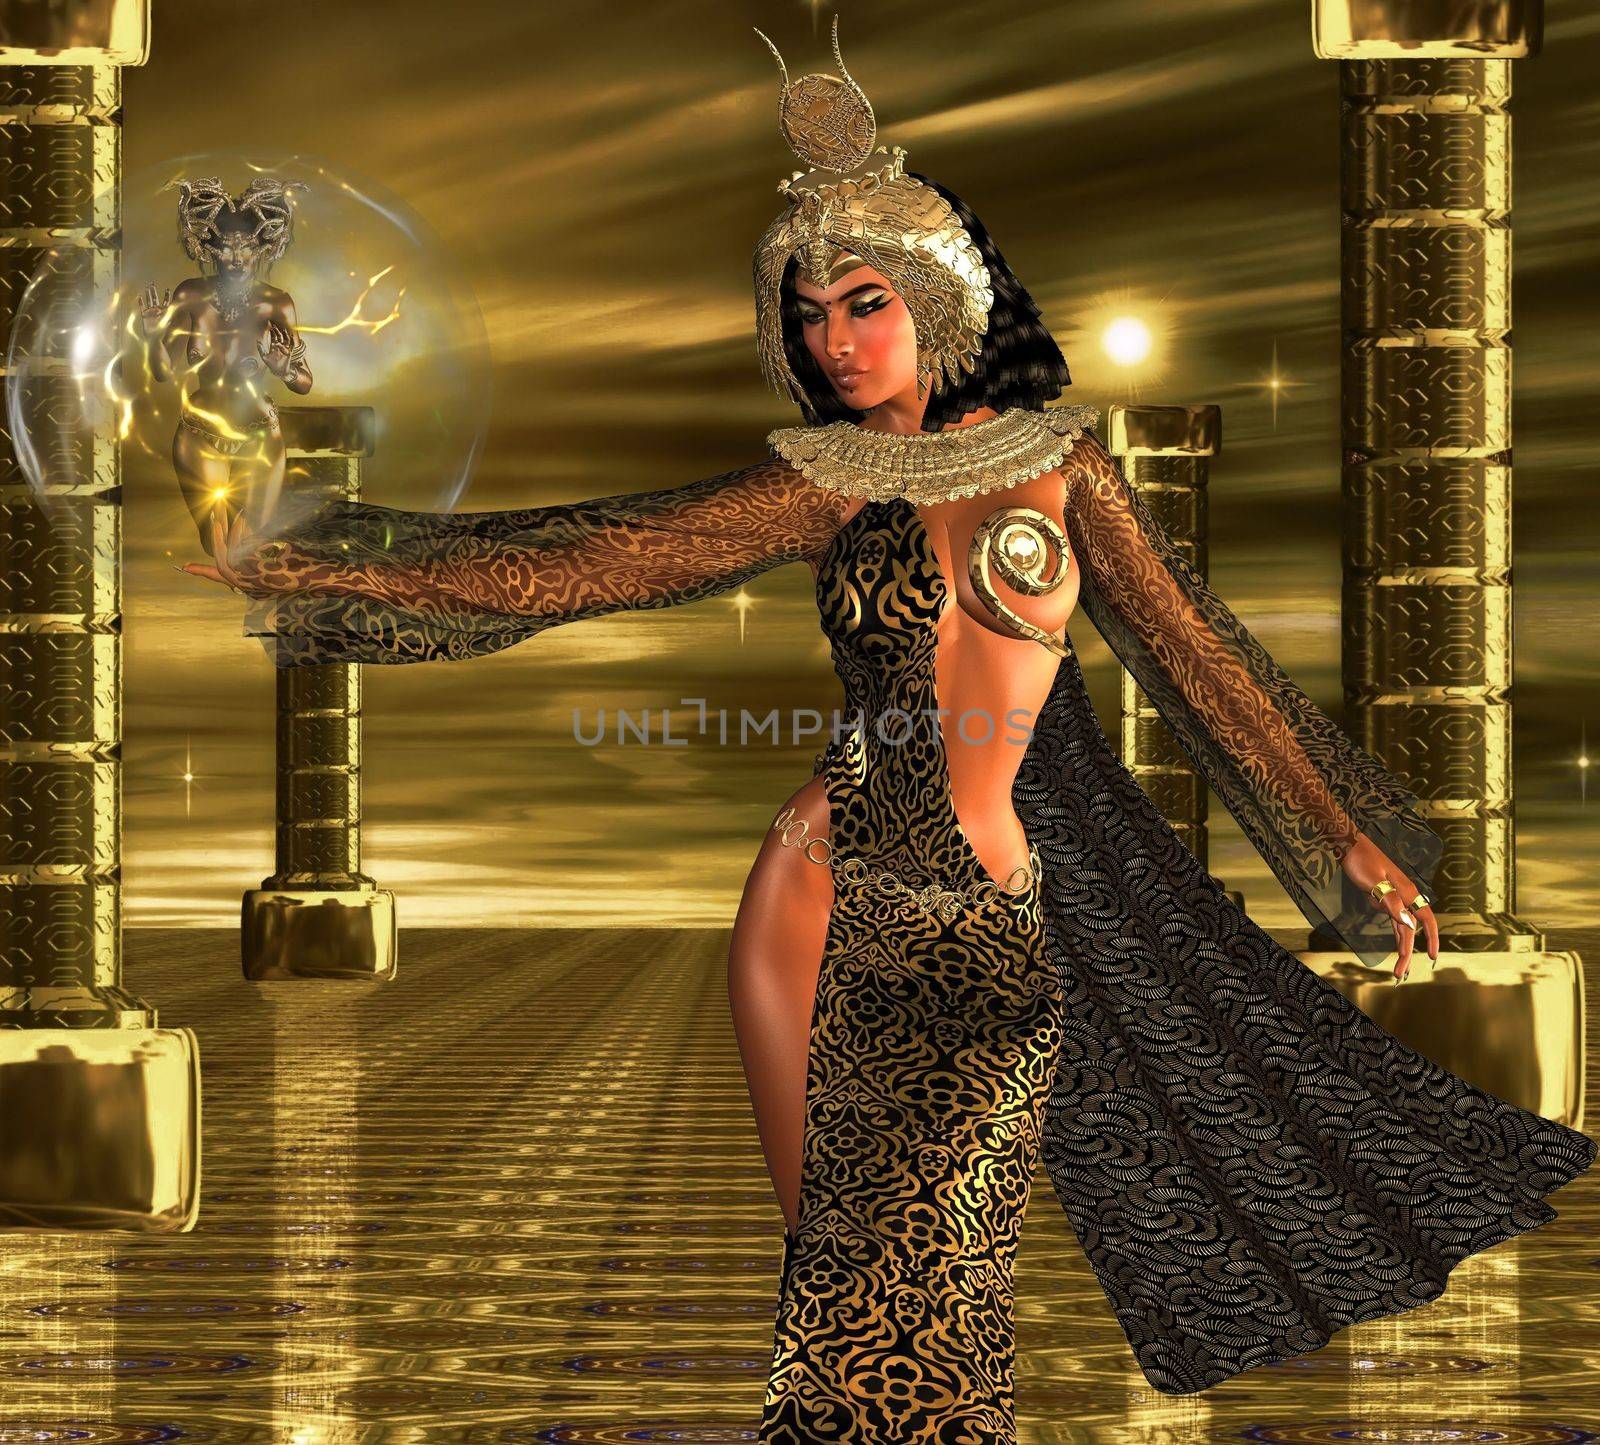 Deeply Desired.An Egyptian sovereign uses her alluring powers to command the gods of the sun to bestow their blessings upon her people.